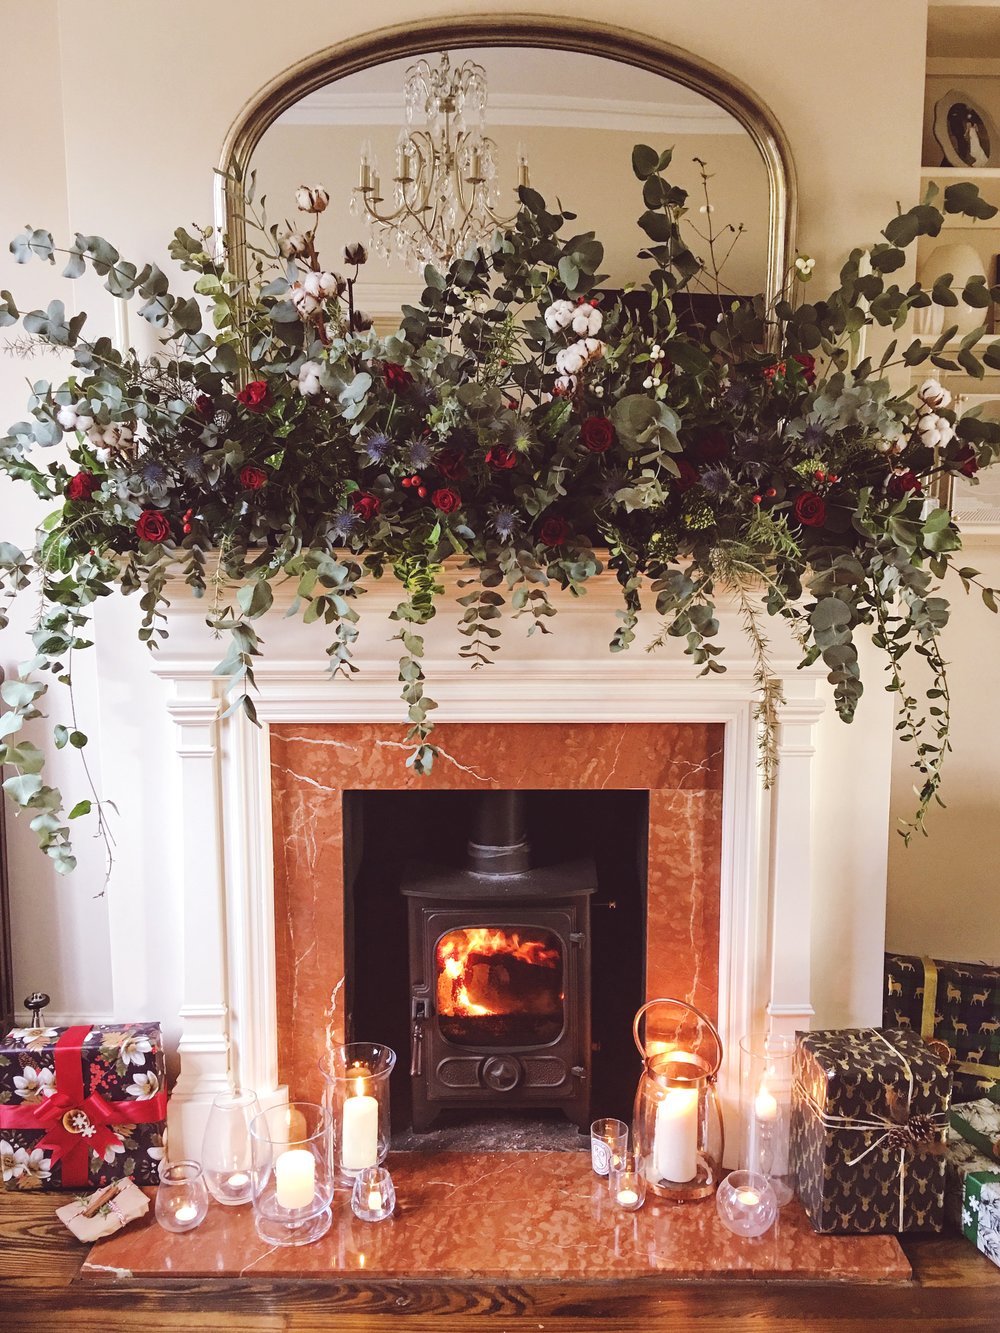 Round Mirror Over Fireplace Elegant My Home at Christmas How to Make This Fireplace Garland